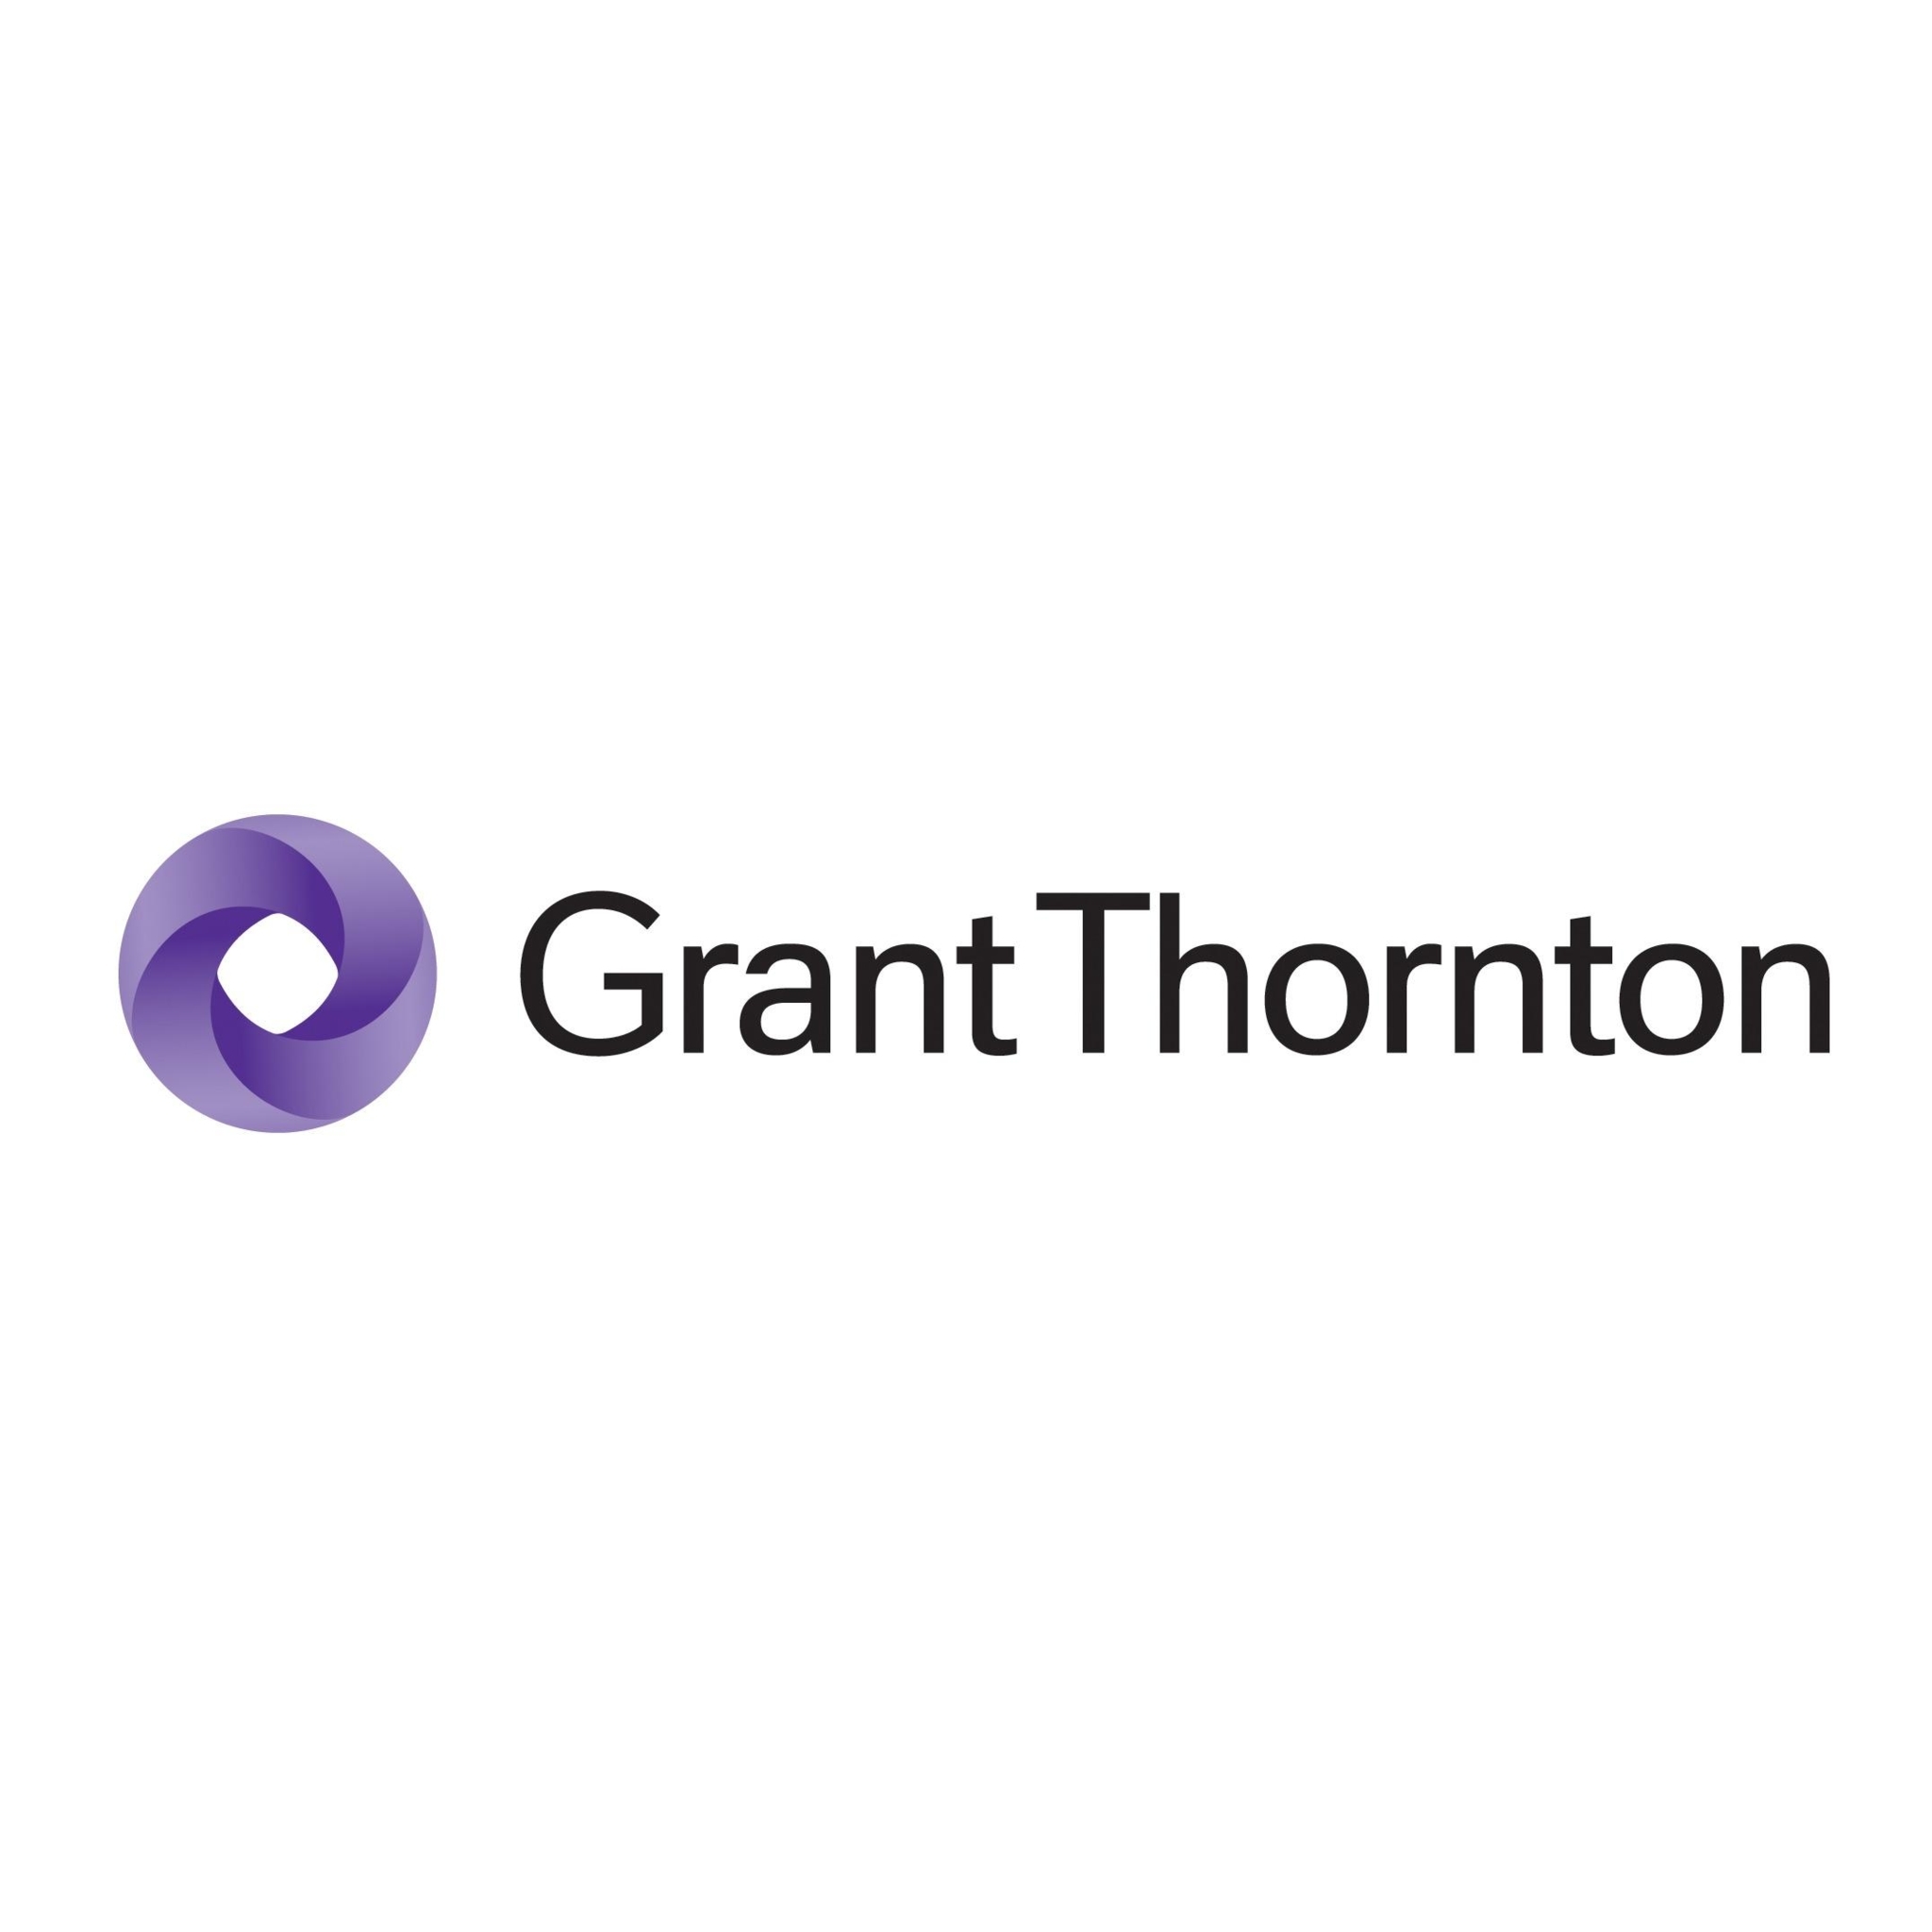 Grant Thornton Limited - Licensed Insolvency Trustees, Bankruptcy and Consumer Proposals - Credit & Debt Counselling